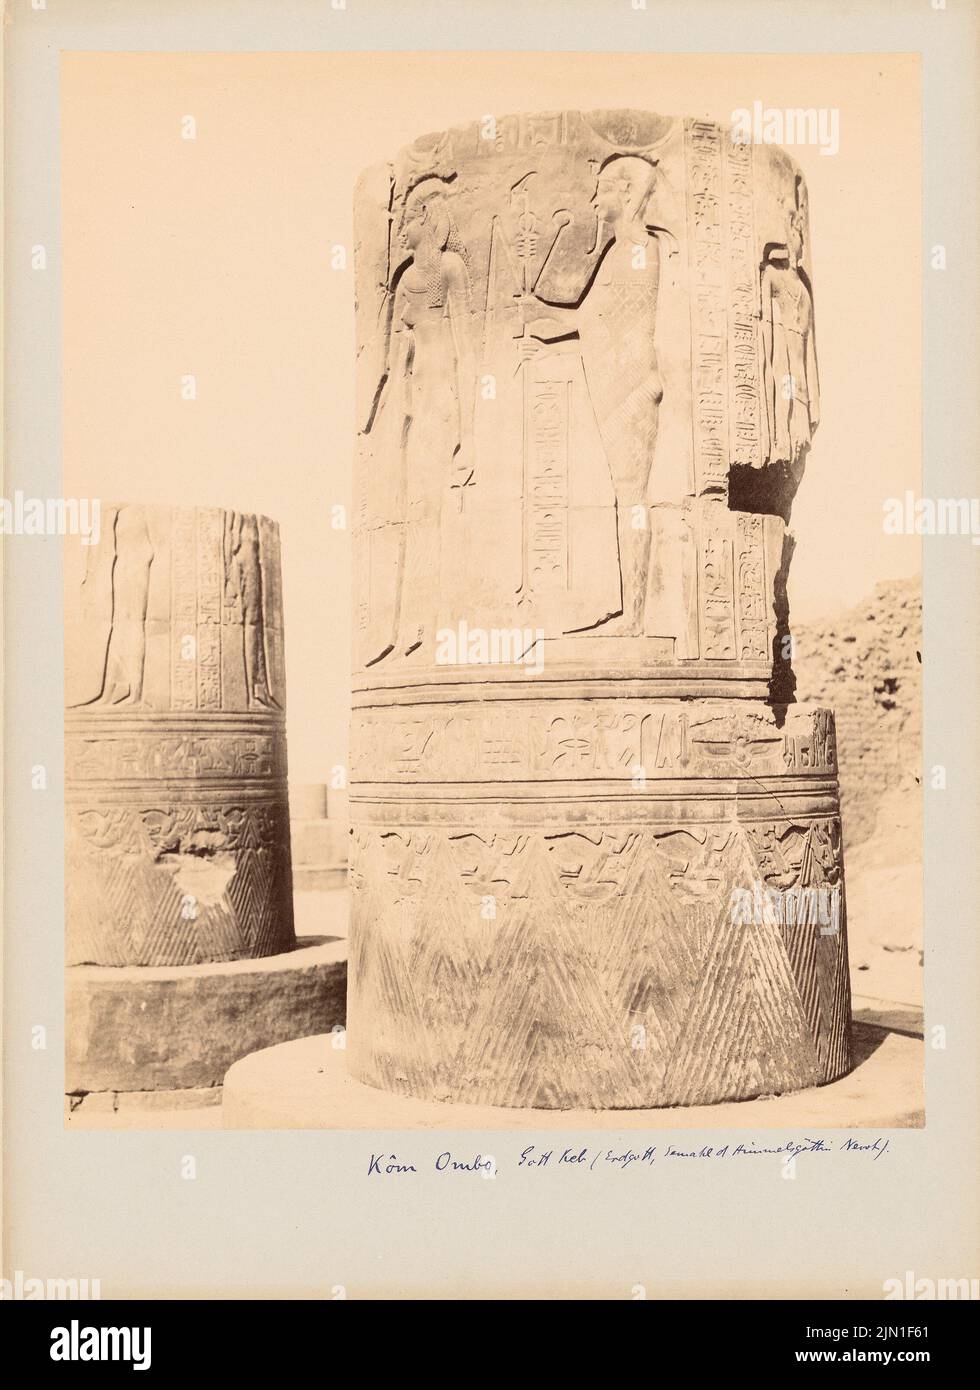 Unknown photographer, Temple of Kom Ombo (without Dat.): Säul section with God (earth god). Photo on cardboard, 31.9 x 24 cm (including scan edges) unbek. Fotograf : Tempel von Kom Ombo Stock Photo